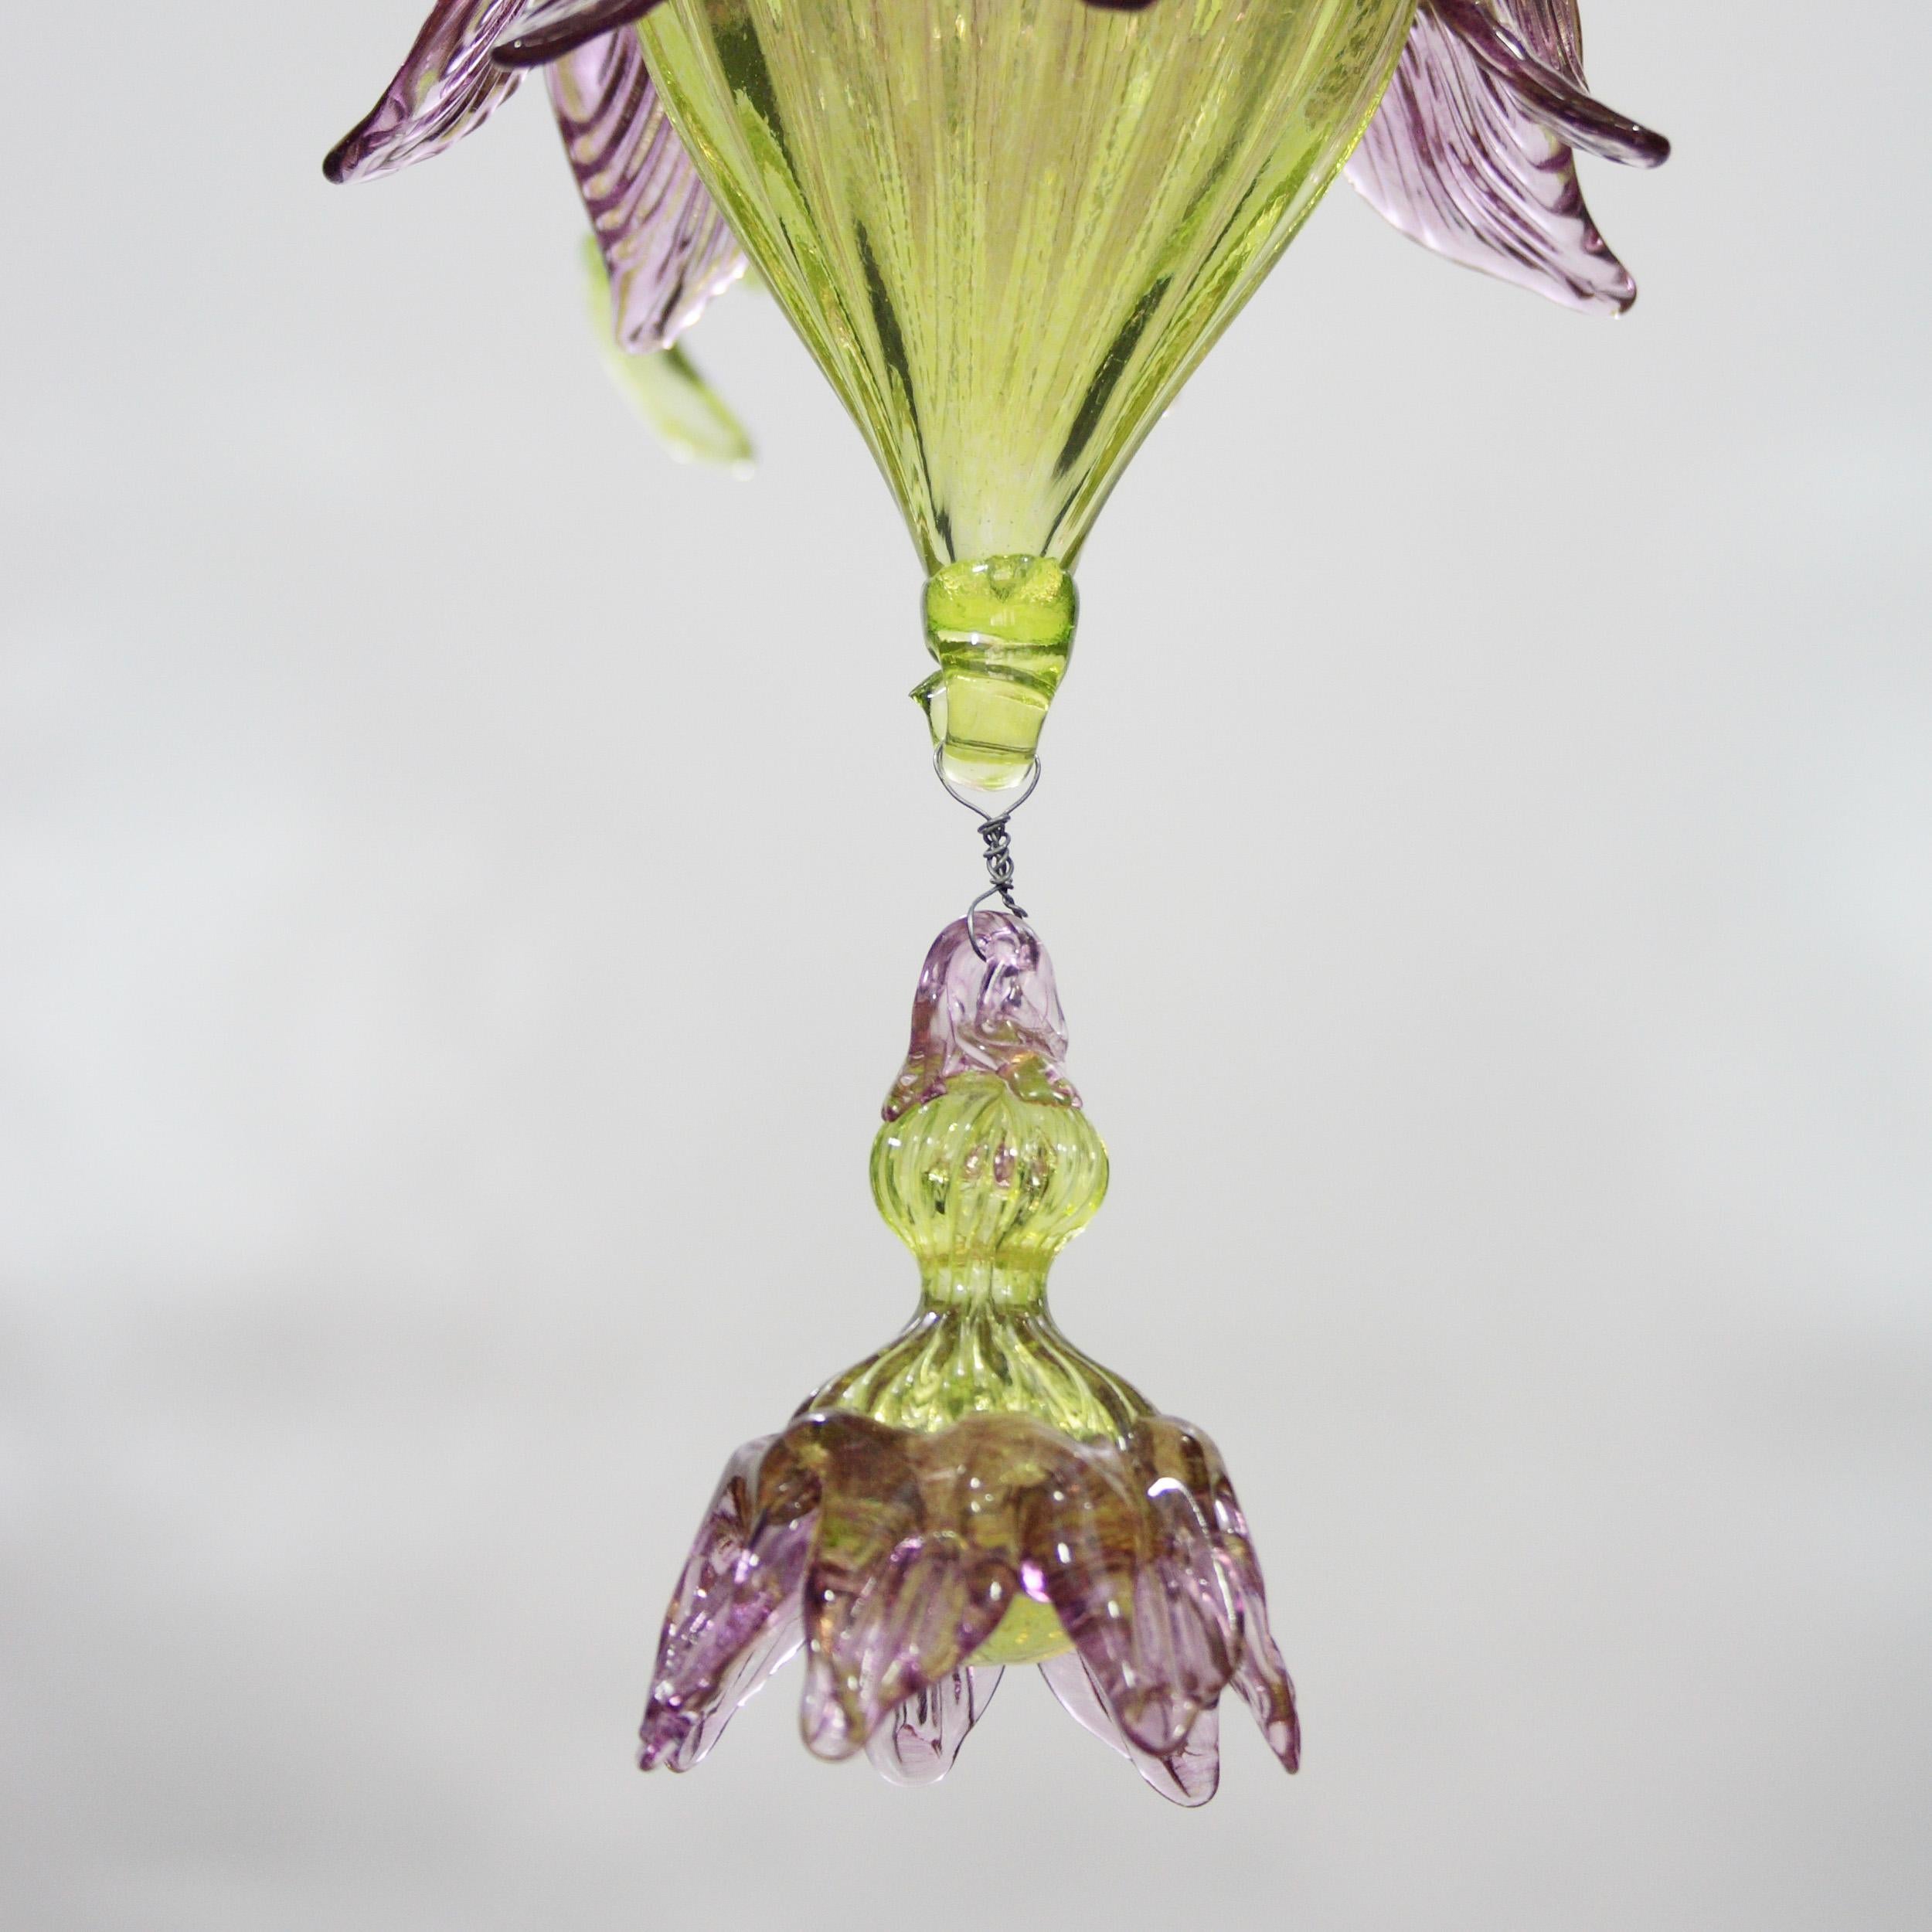 Artistic Rich Chandelier 3 Arms Green-Amethyst Murano Glass by Multiforme In New Condition For Sale In Trebaseleghe, IT